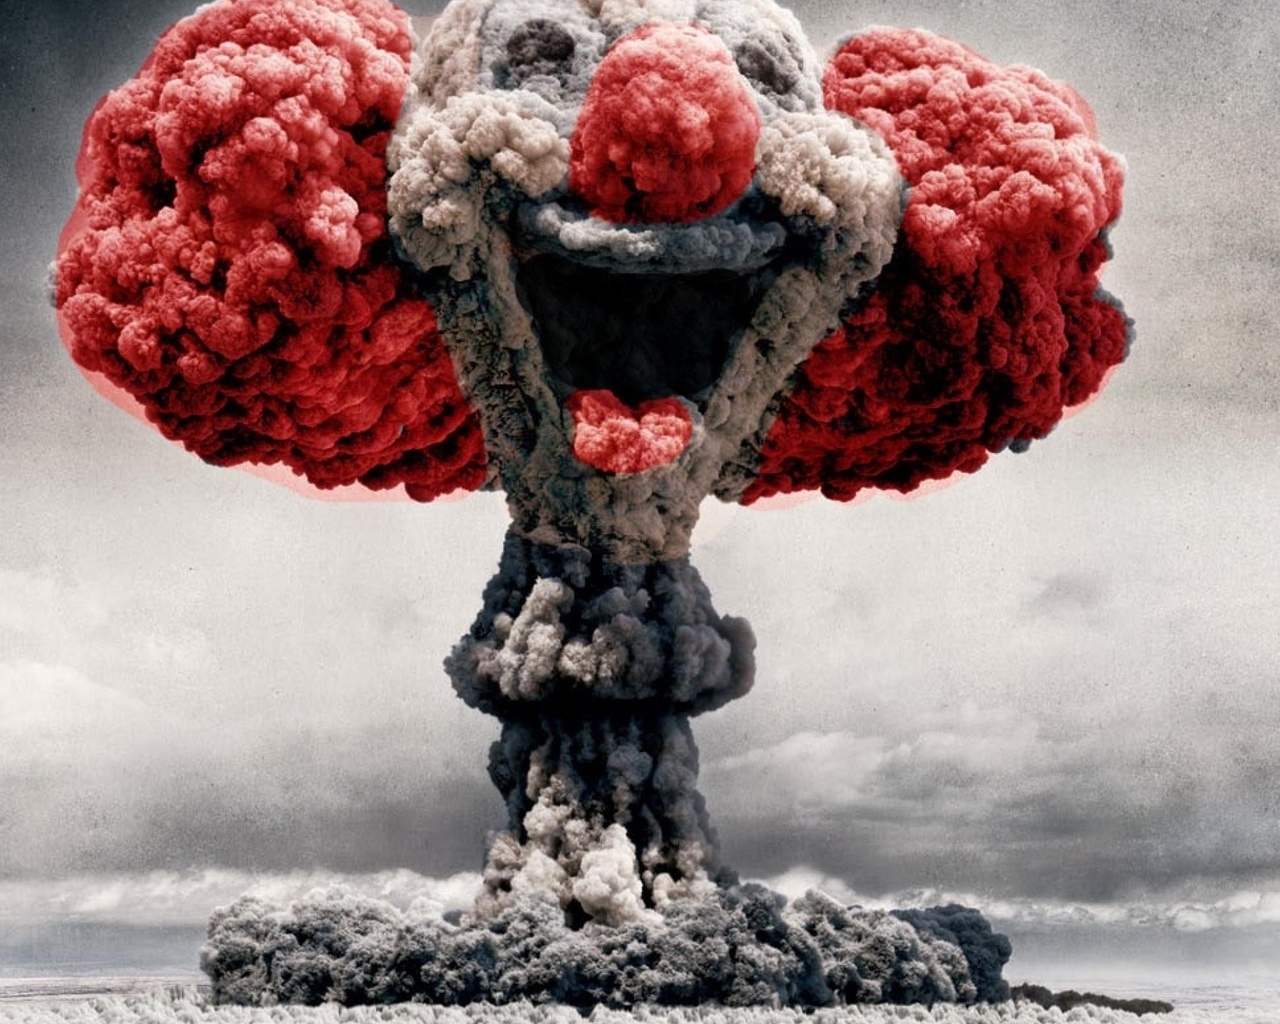 Nuclear Clown for 1280 x 1024 resolution